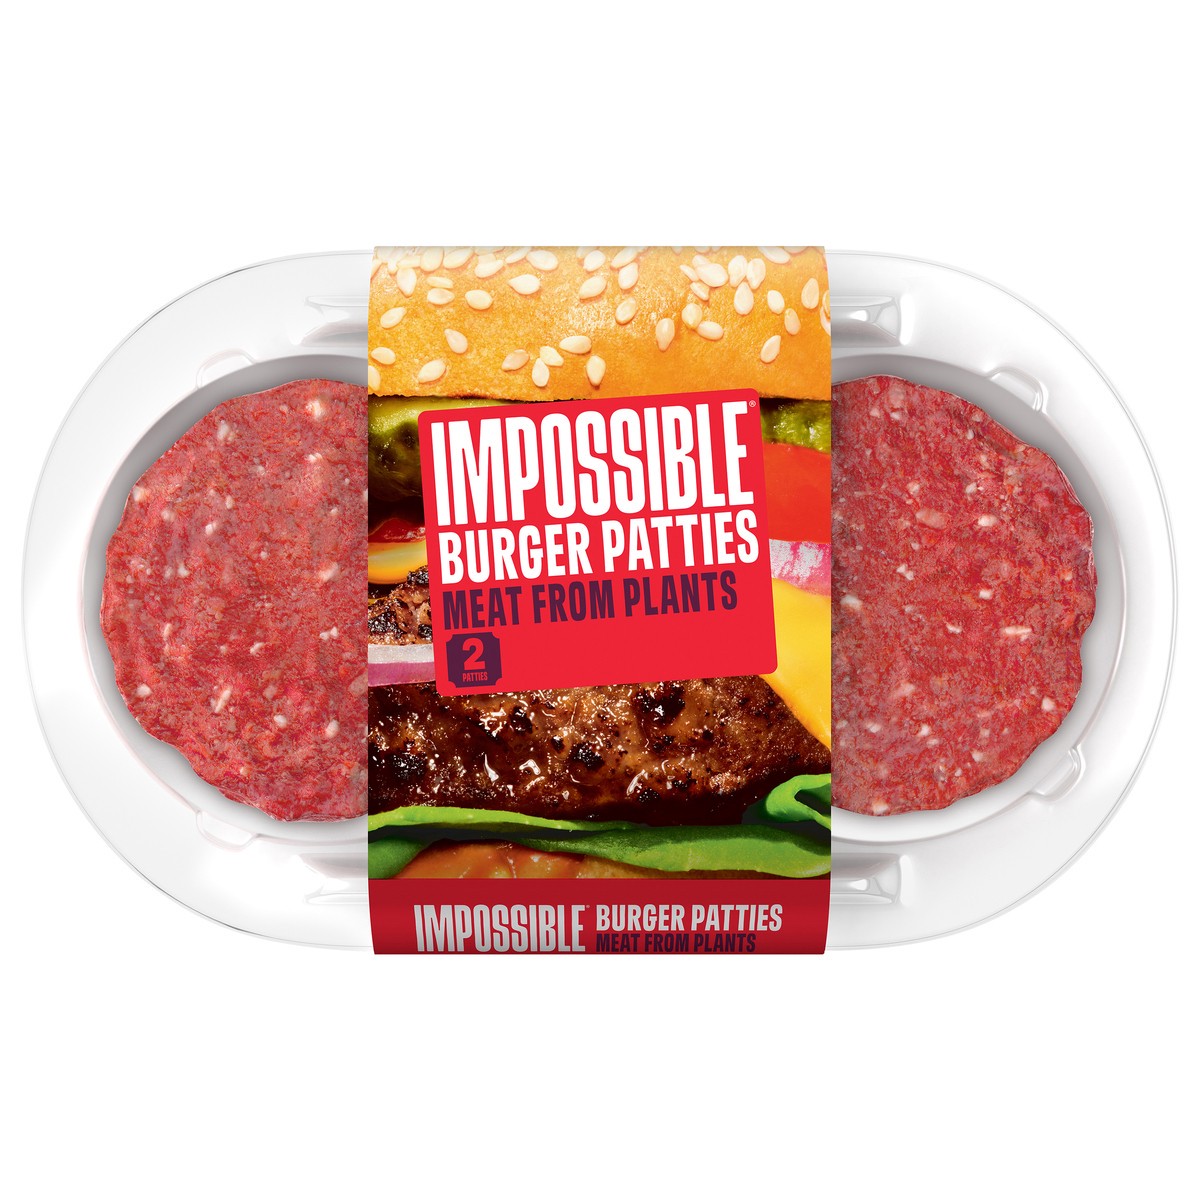 slide 1 of 64, Impossible™ Burger Patties Meat From Plants, 2 Patties, 8 oz, 2 ct